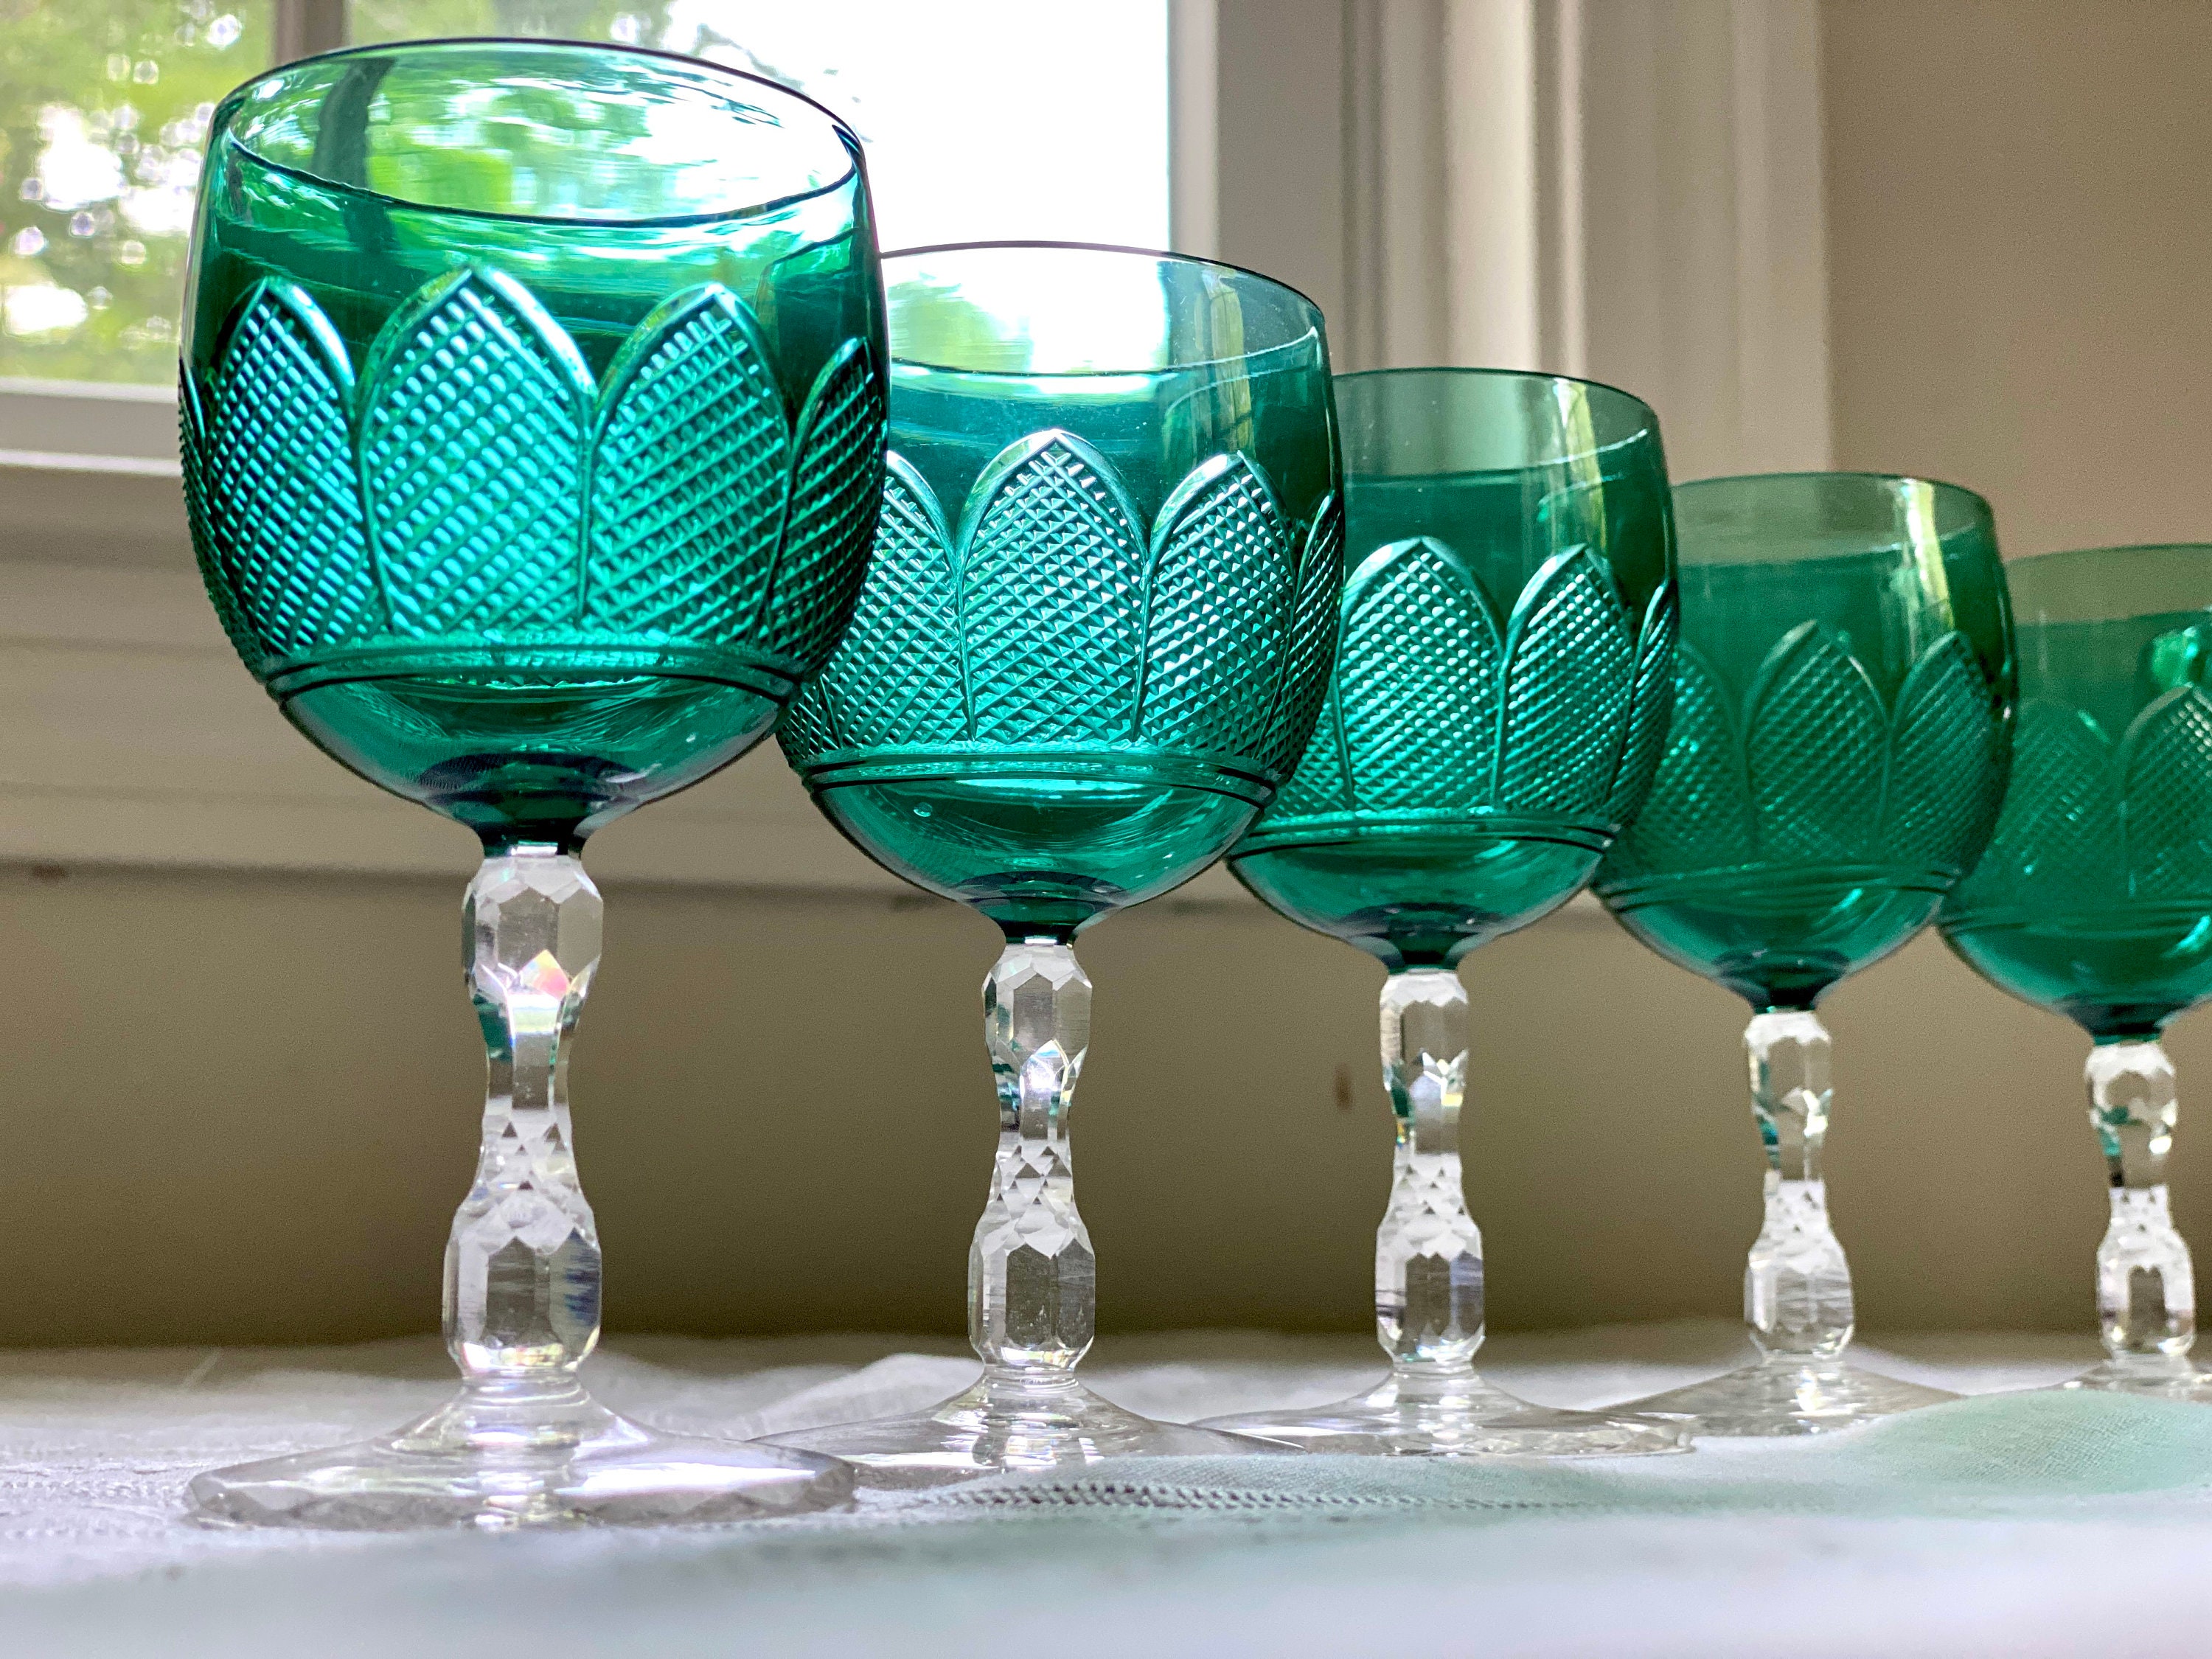 Five Faceted Crystal Wine Glasses Set, Vintage Stemware and Home Decor —  French Antiques Vintage French Decor French Linens Cafe au Lait Bowls and  more